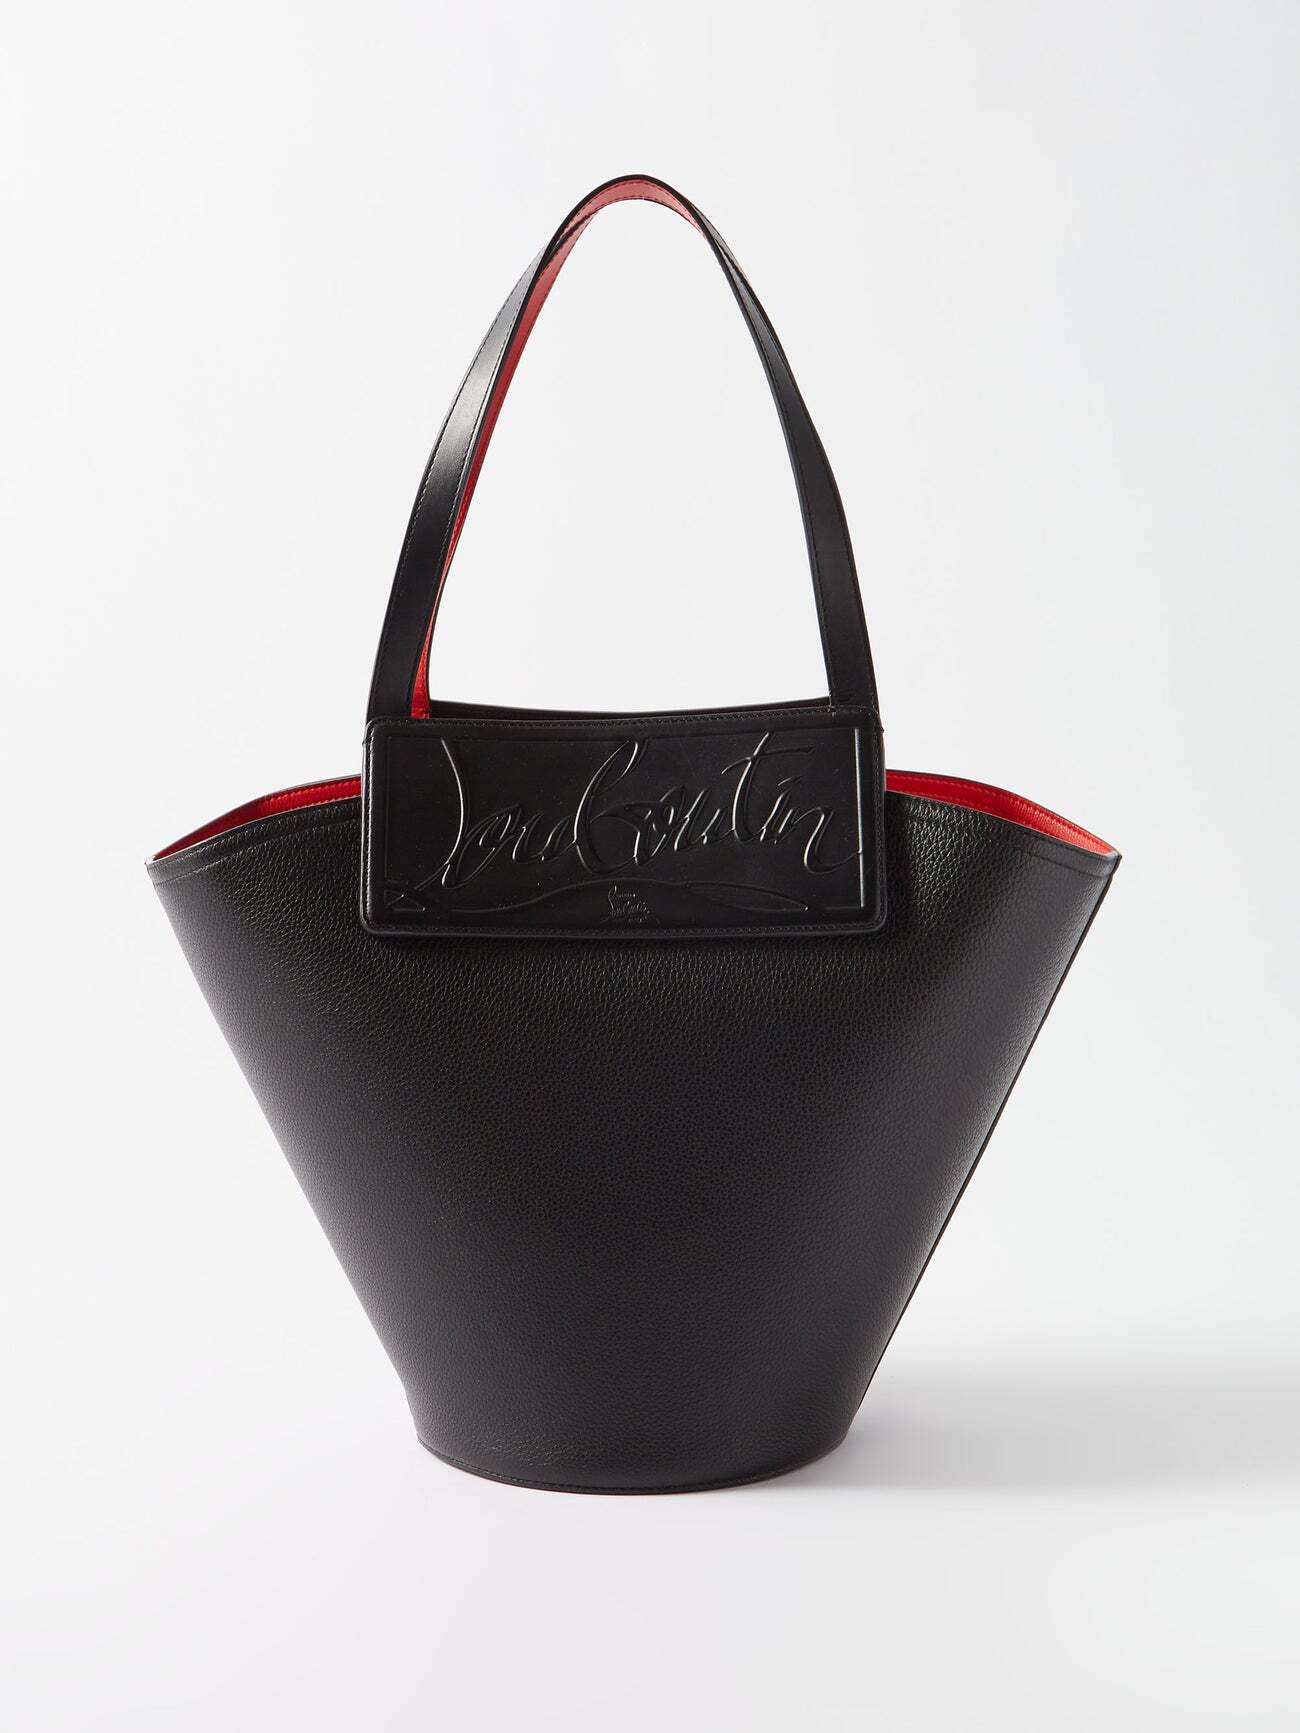 Christian Louboutin - Loubishore Grained-leather Tote Bag - Womens - Black